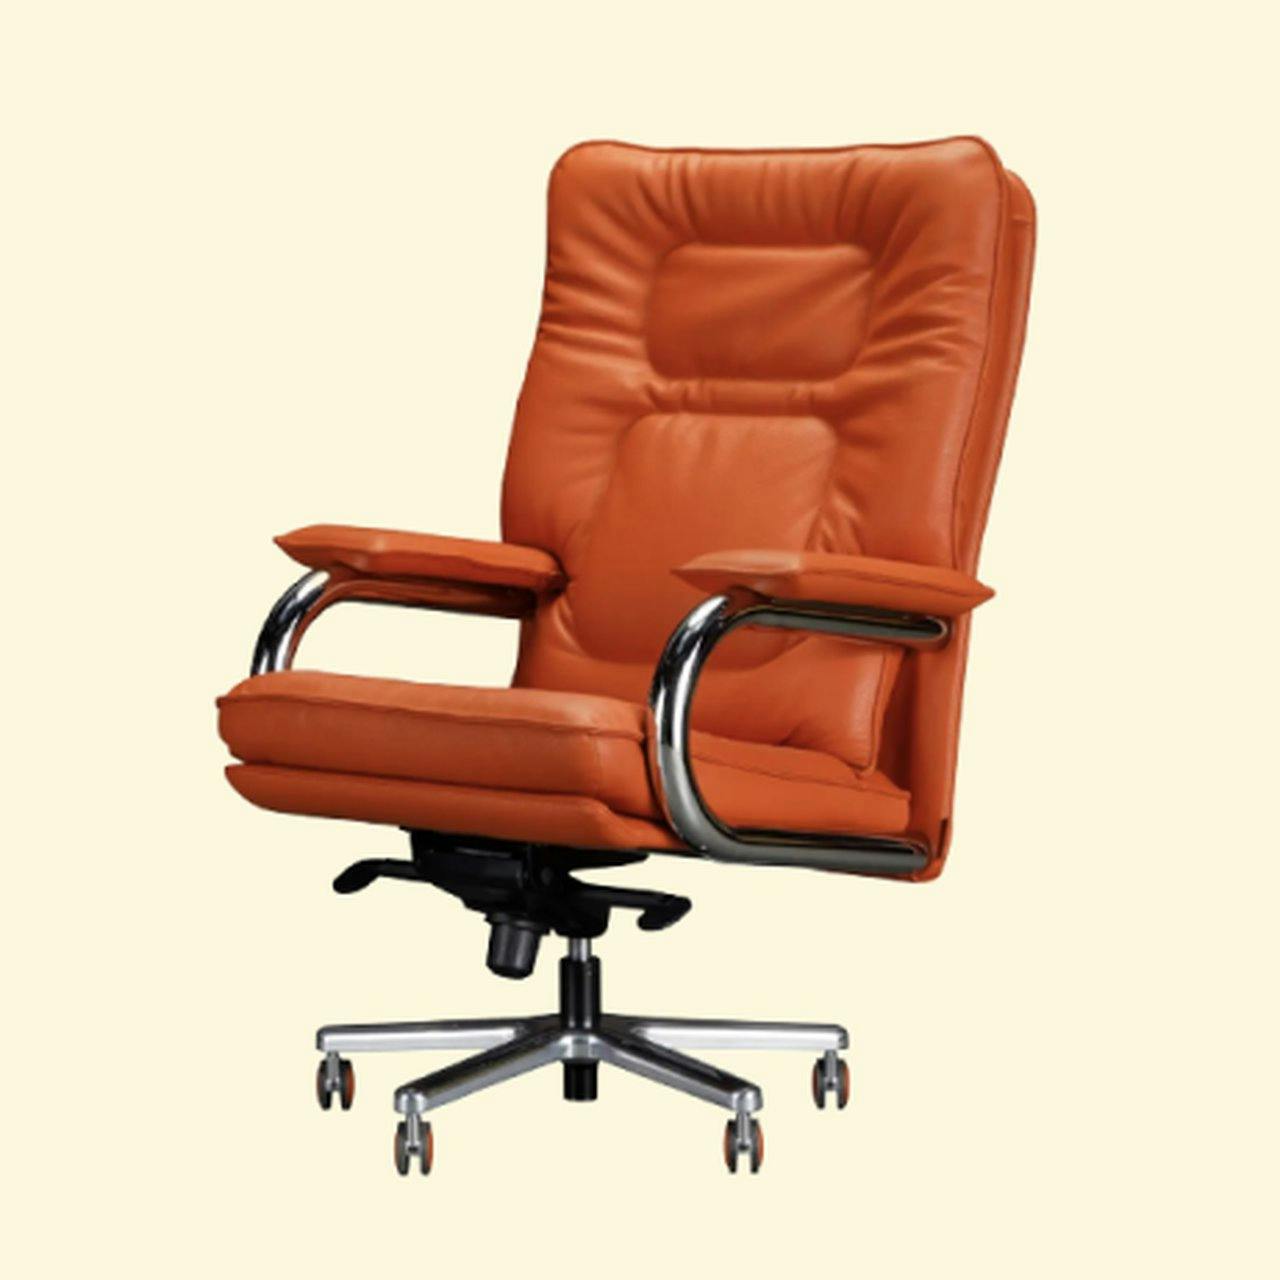 Arrben Office chairs